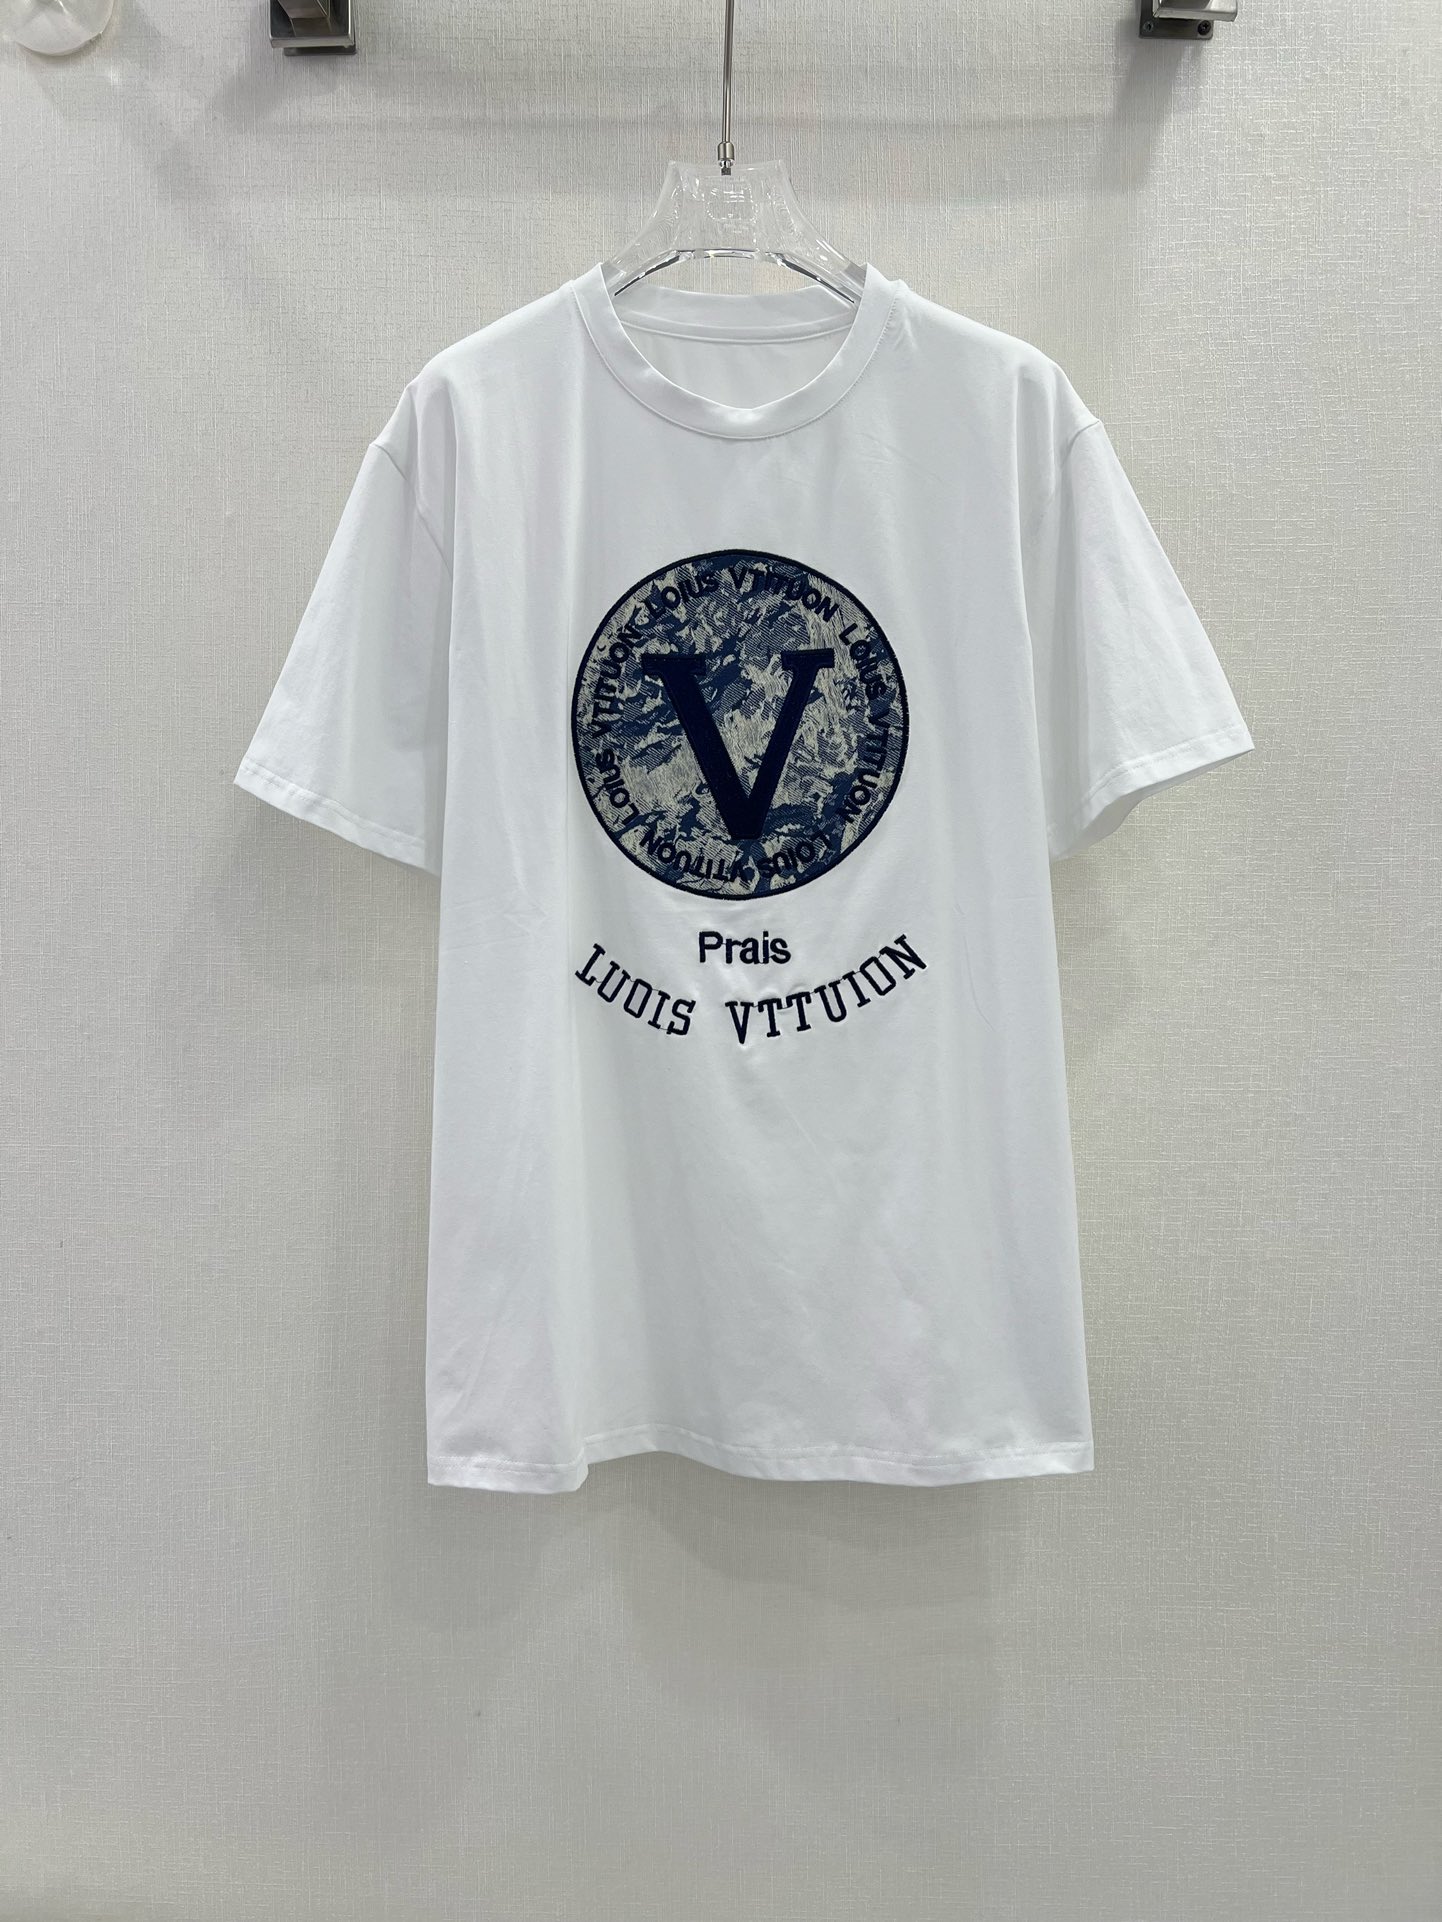 Louis Vuitton Clothing T-Shirt White Spring Collection Short Sleeve